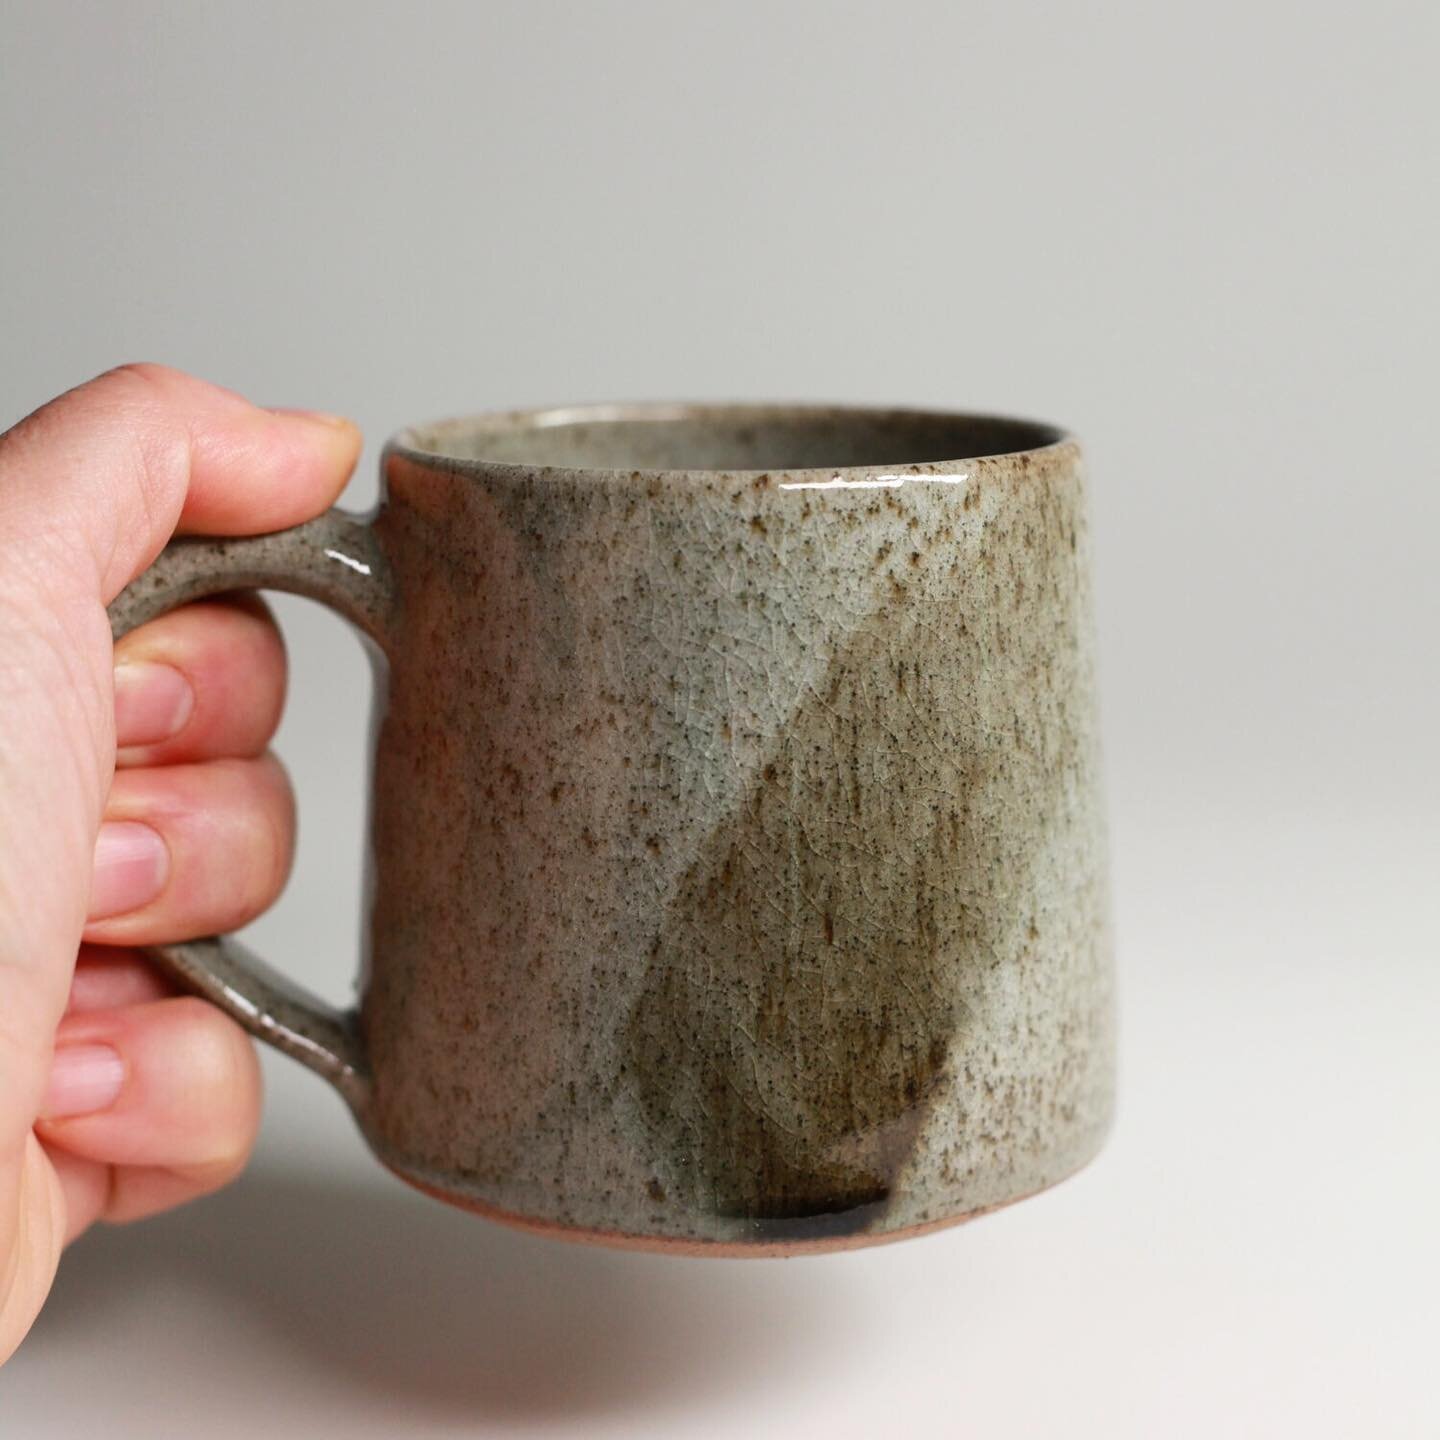 Gas fired tea mug in celadon glaze with tenmoku mark. In case you are still searching for that perfect mug 😊